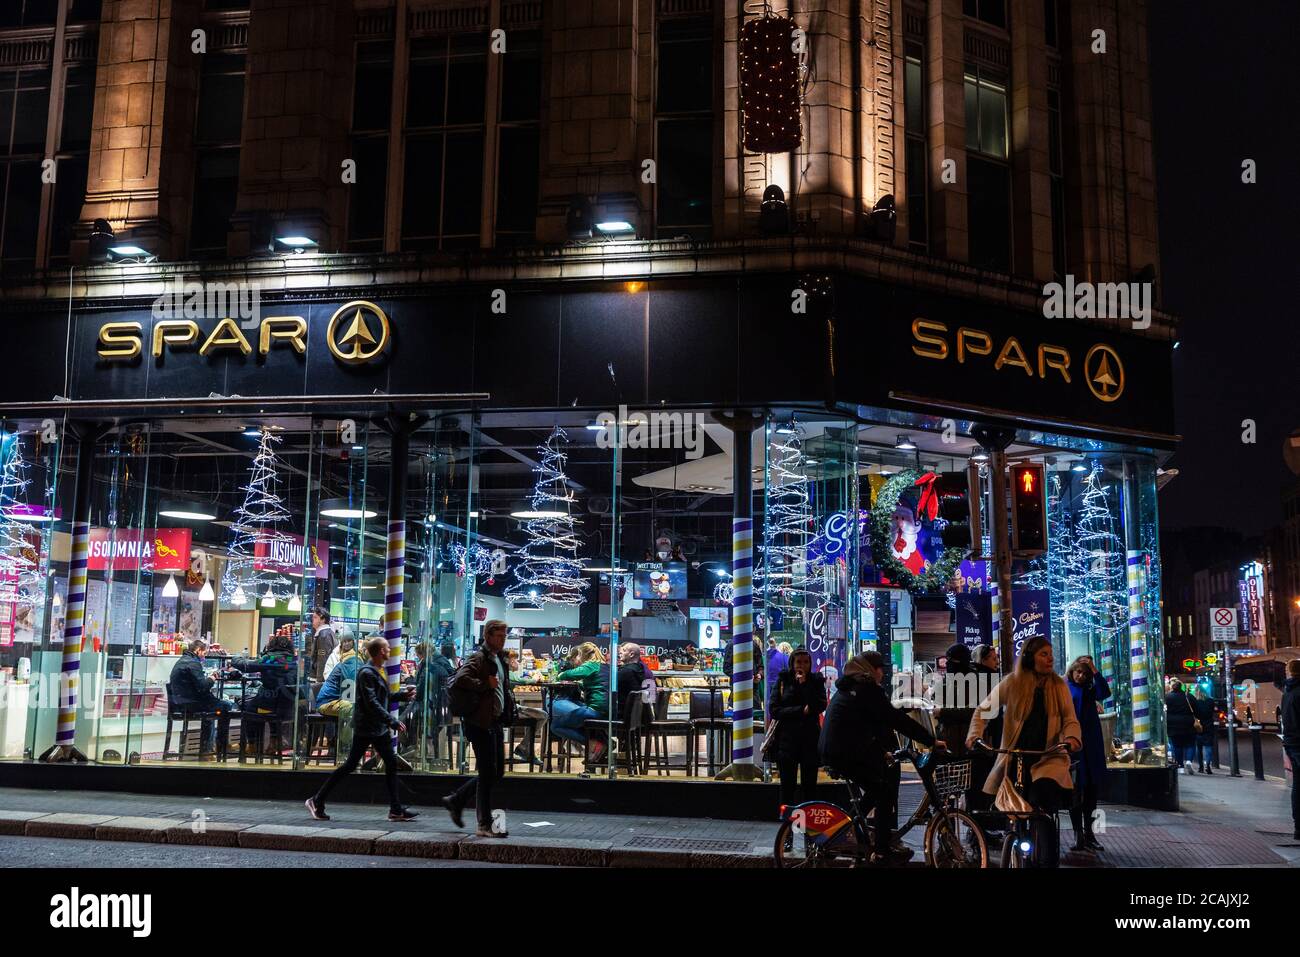 Dublin, Ireland - December 30, 2019: Shopping street at night with a Spar supermarket with christmas decoration and people around in the center of Dub Stock Photo